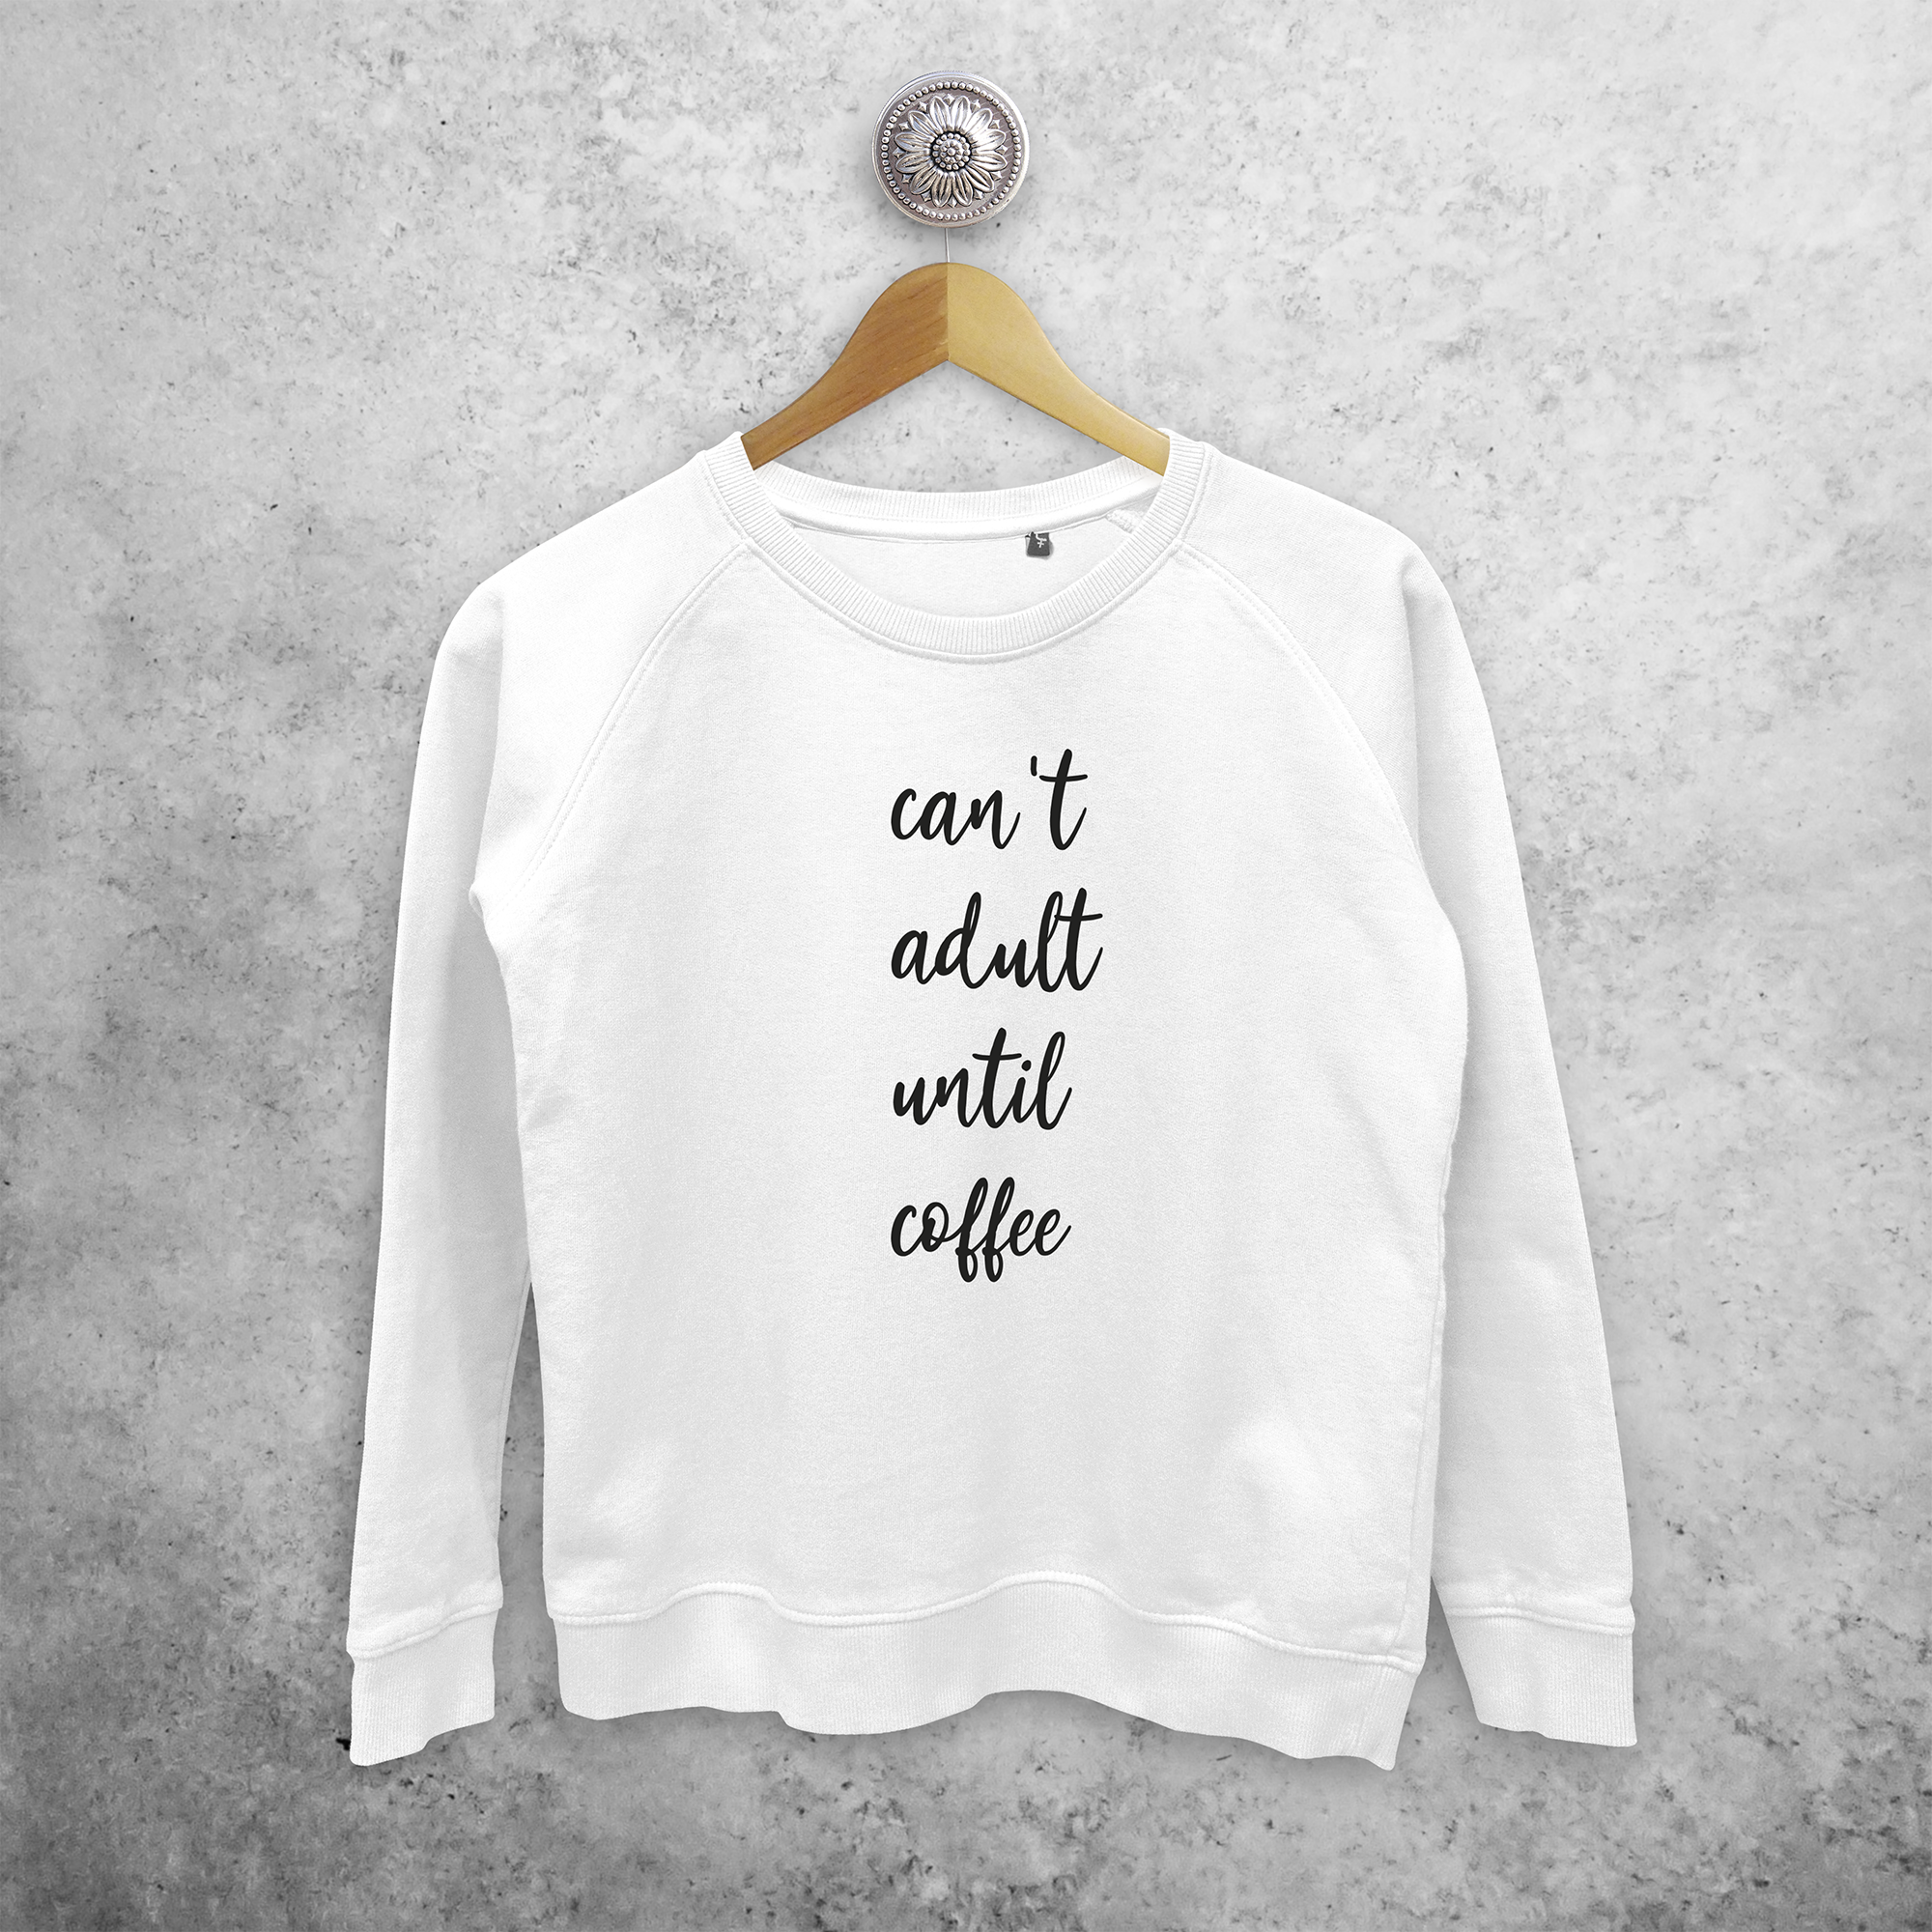 'Can't adult until coffee' sweater